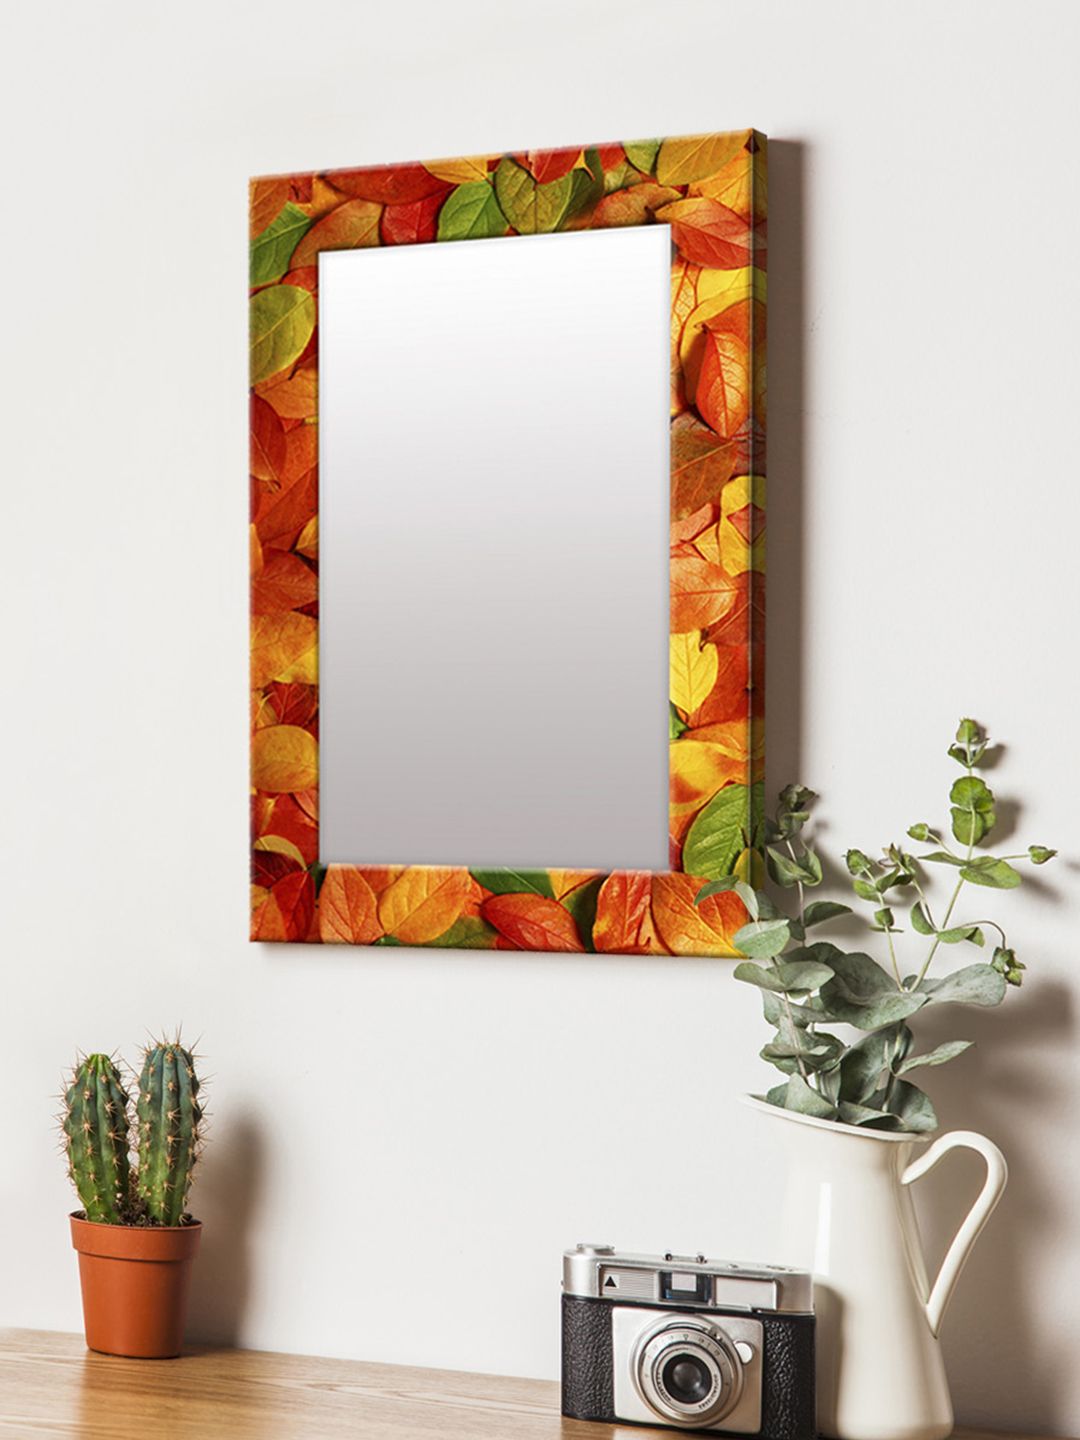 999Store Red & Yellow Printed MDF Wall Mirror Price in India